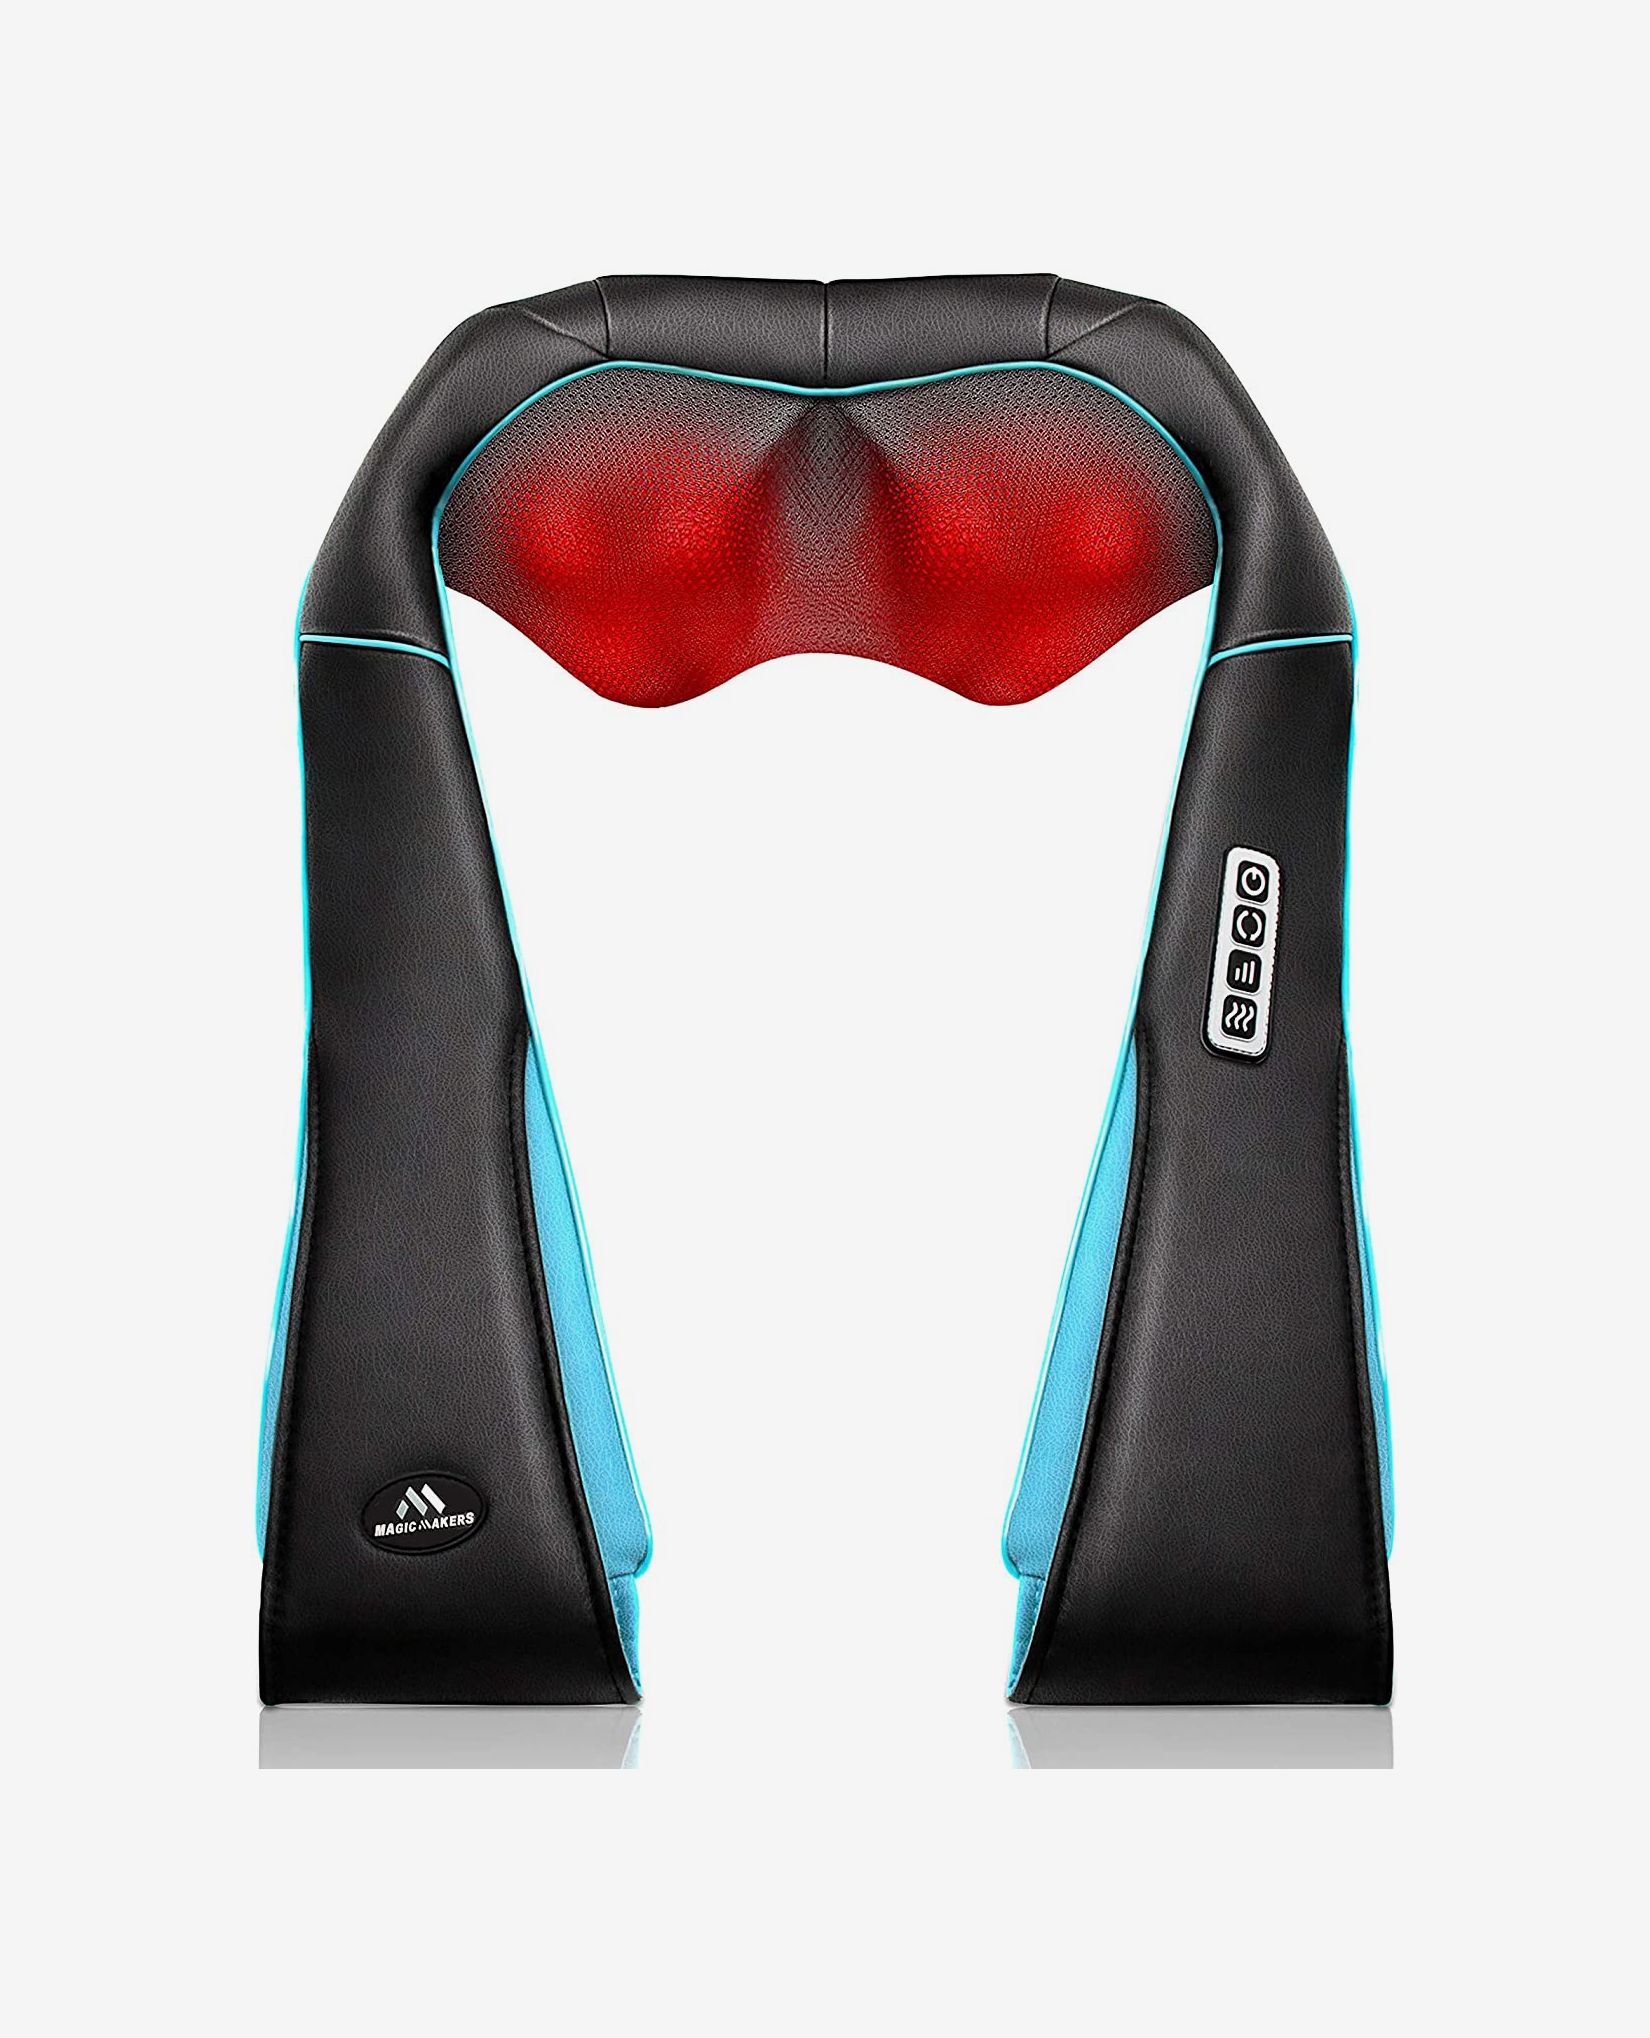 Magic Makers - Shiatsu Back, Shoulder, and Neck Massager with Heat